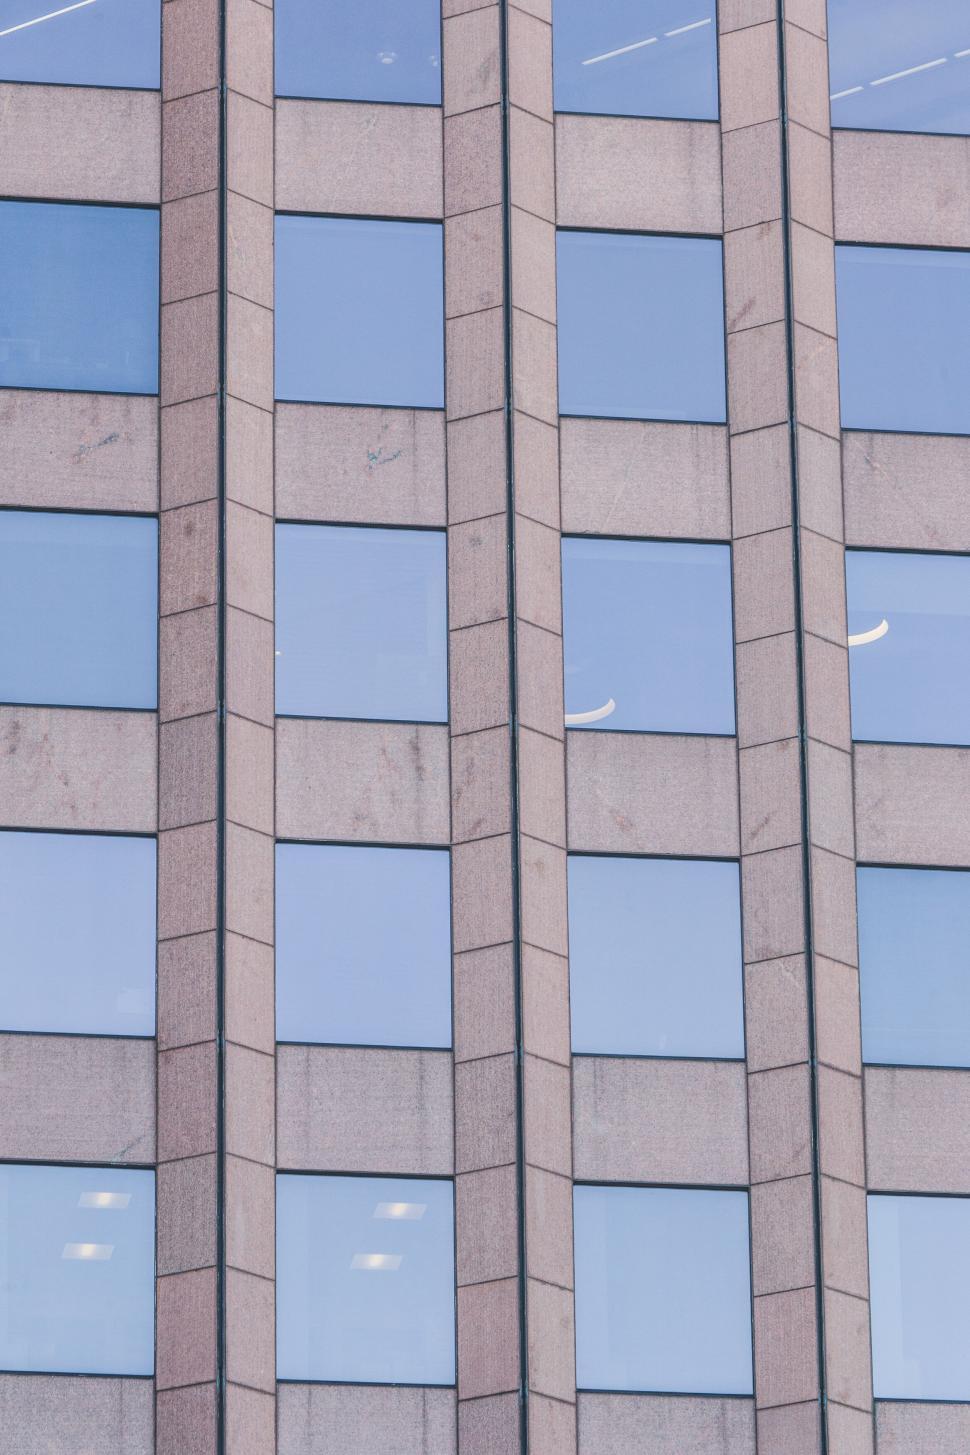 Free Image of Reflections in the windows of a modern building 